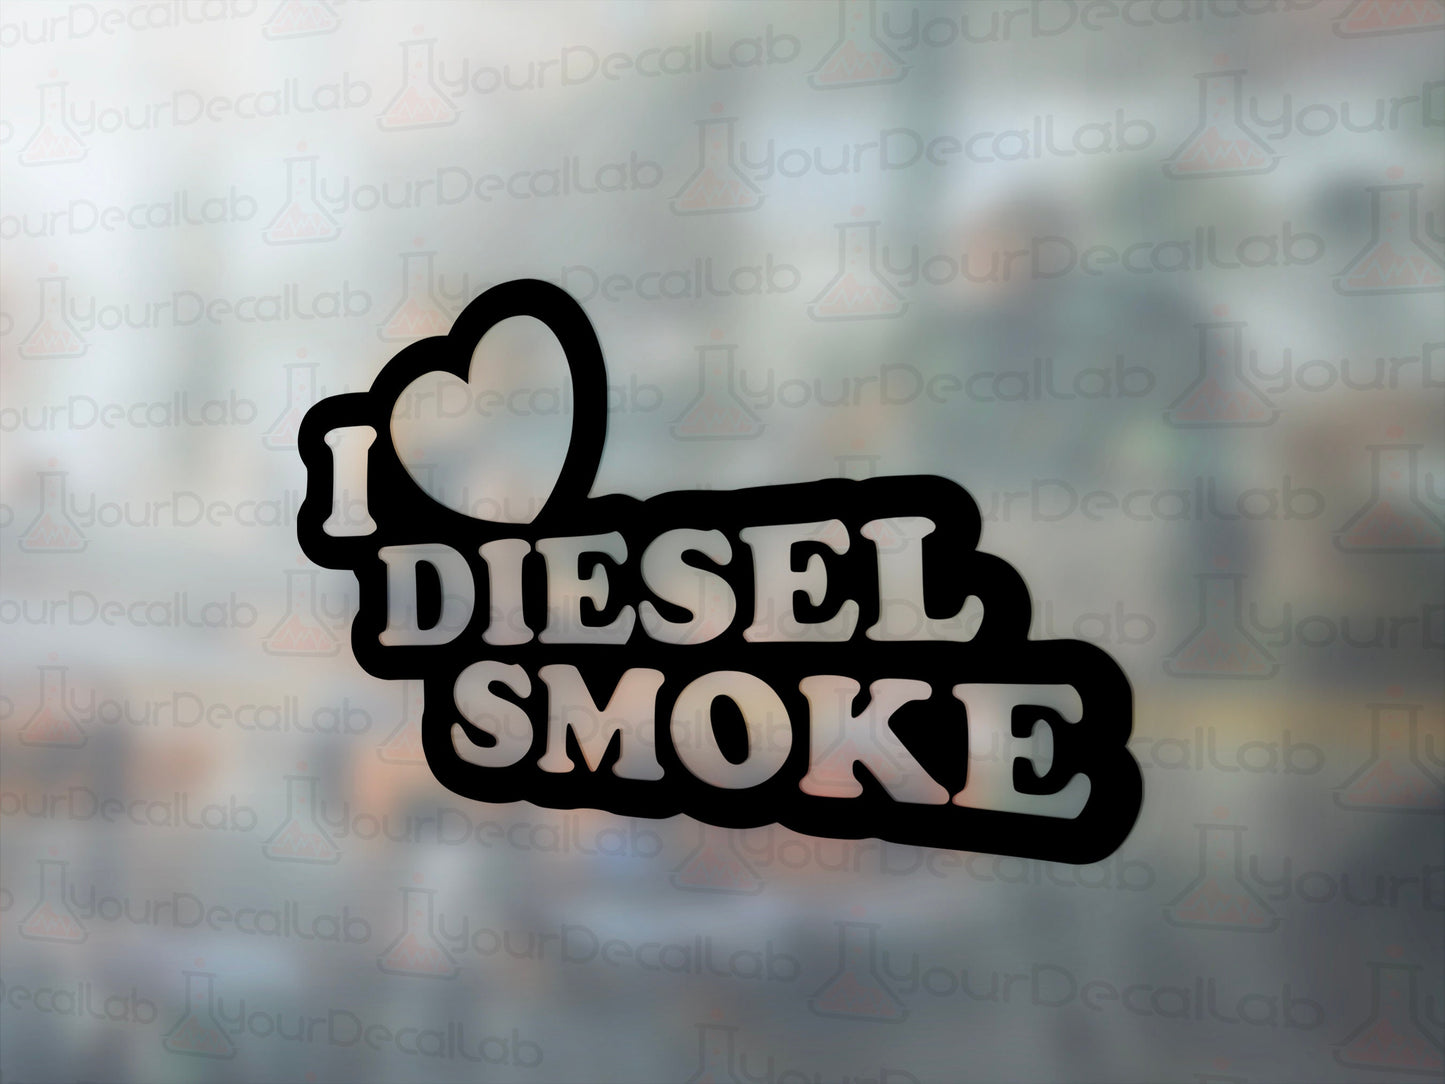 I Love Diesel Smoke Decal - Many Colors & Sizes